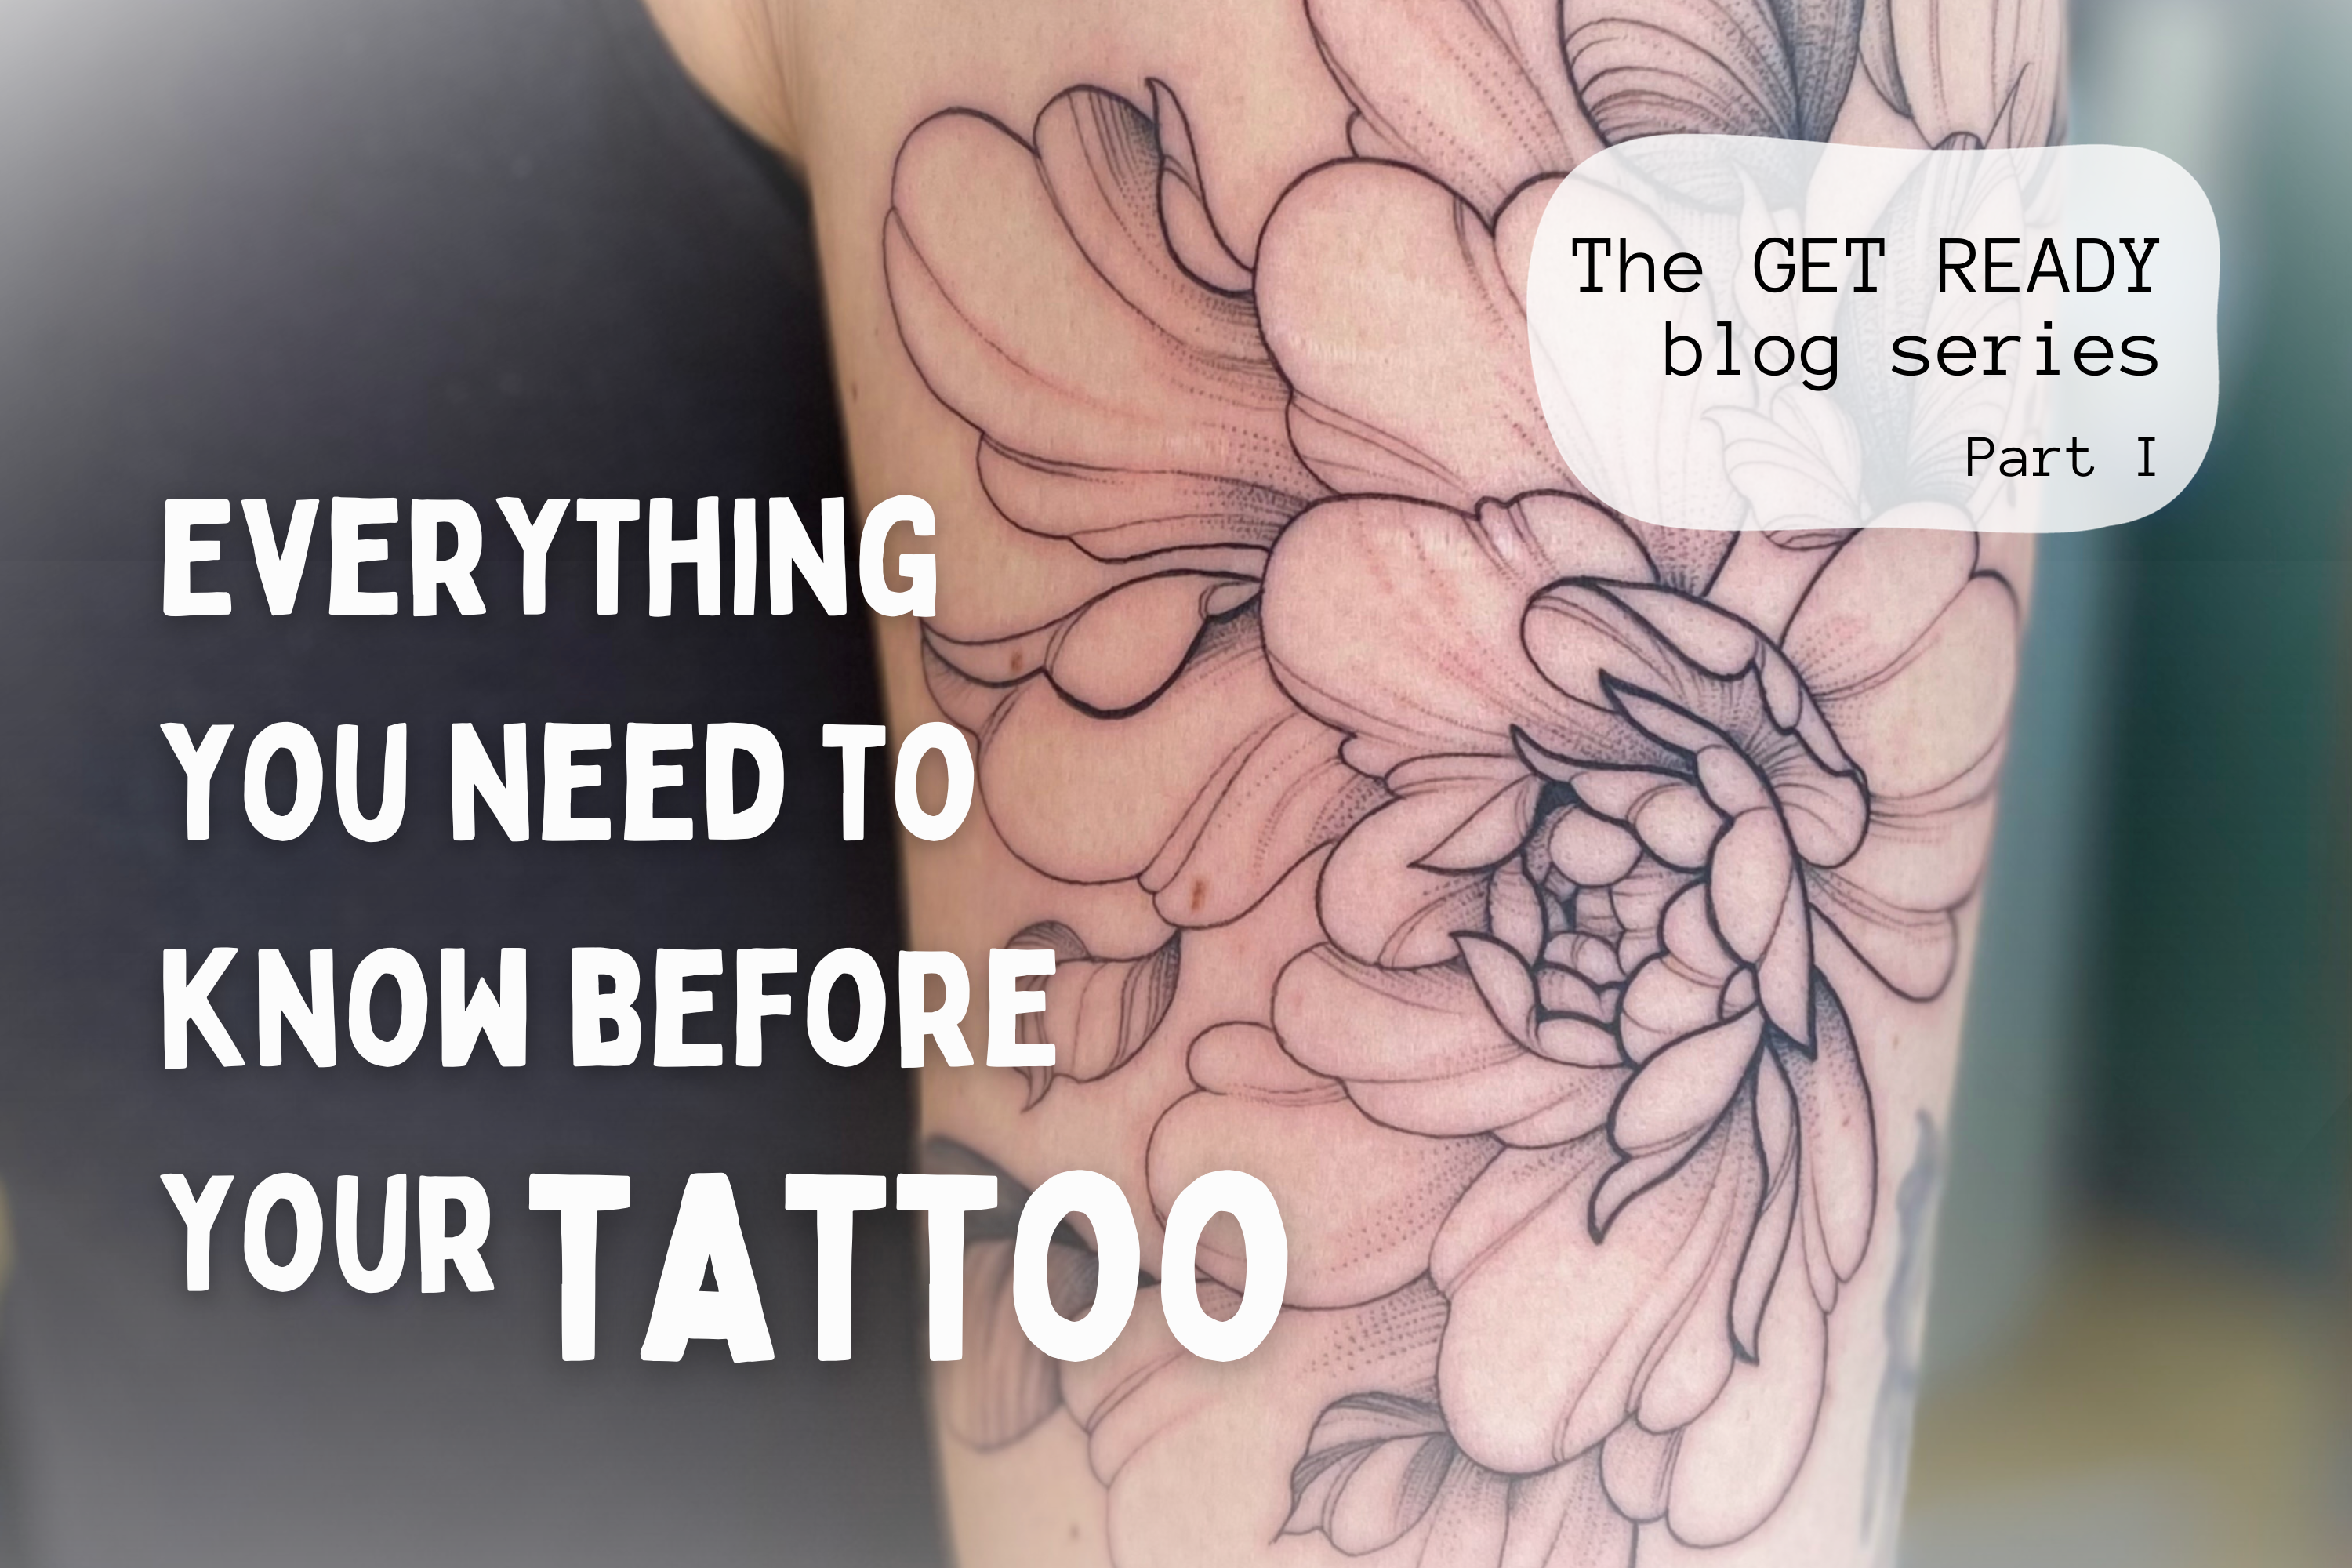 HOW TO PREPARE FOR A COSMETIC TATTOO